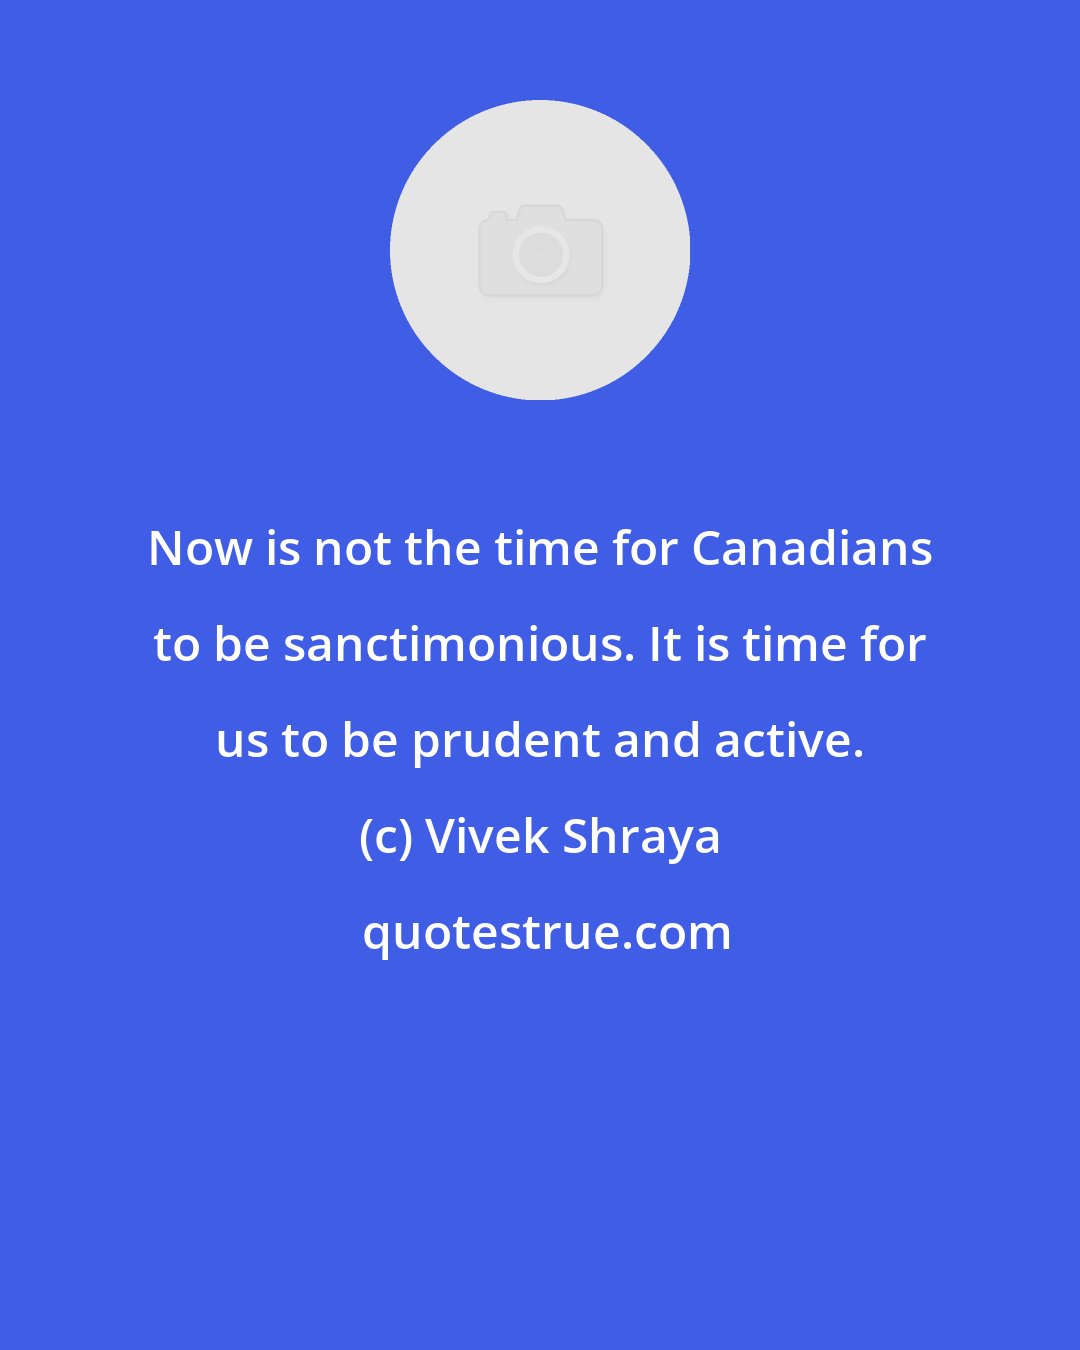 Vivek Shraya: Now is not the time for Canadians to be sanctimonious. It is time for us to be prudent and active.